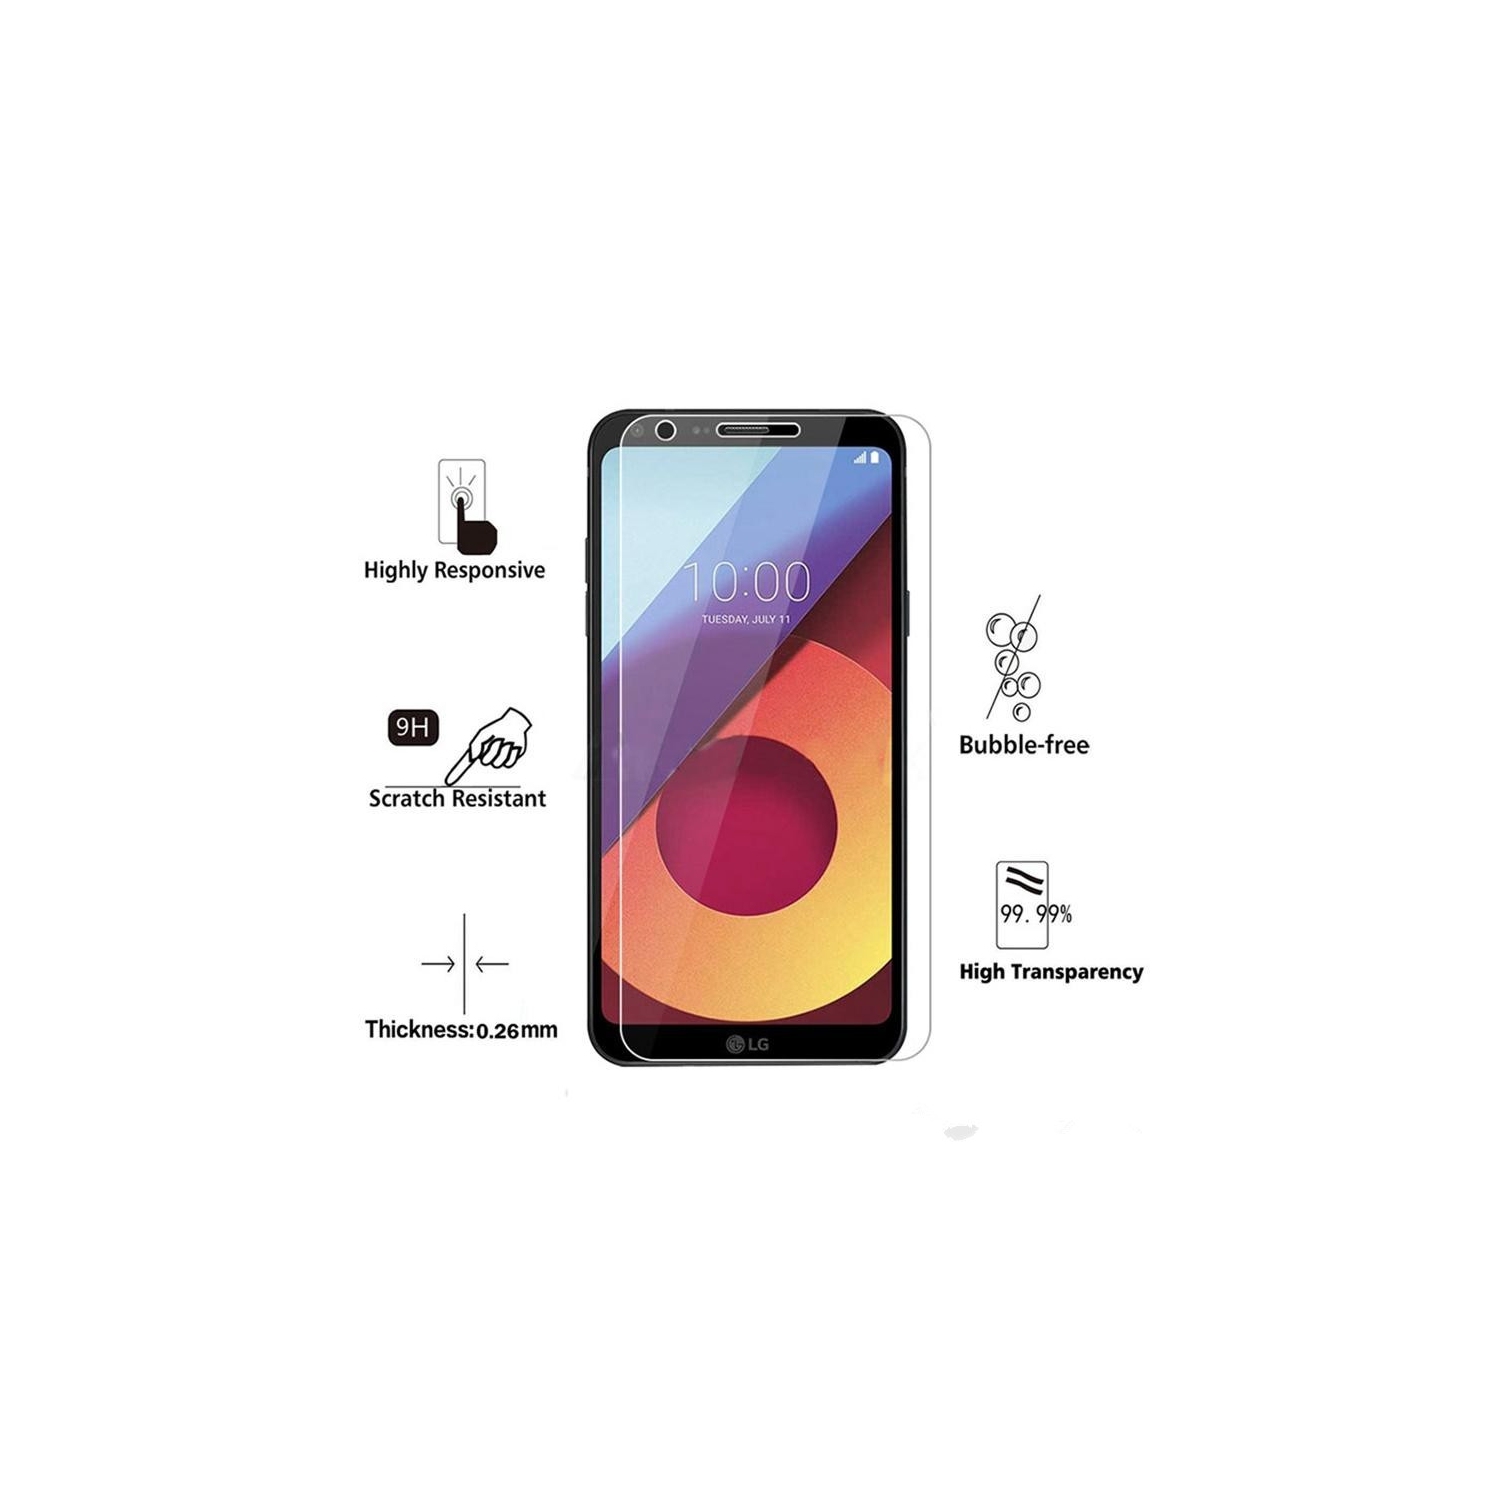 【2 Packs】 CSmart Premium Tempered Glass Screen Protector for LG Q6, Case Friendly & Bubble Free